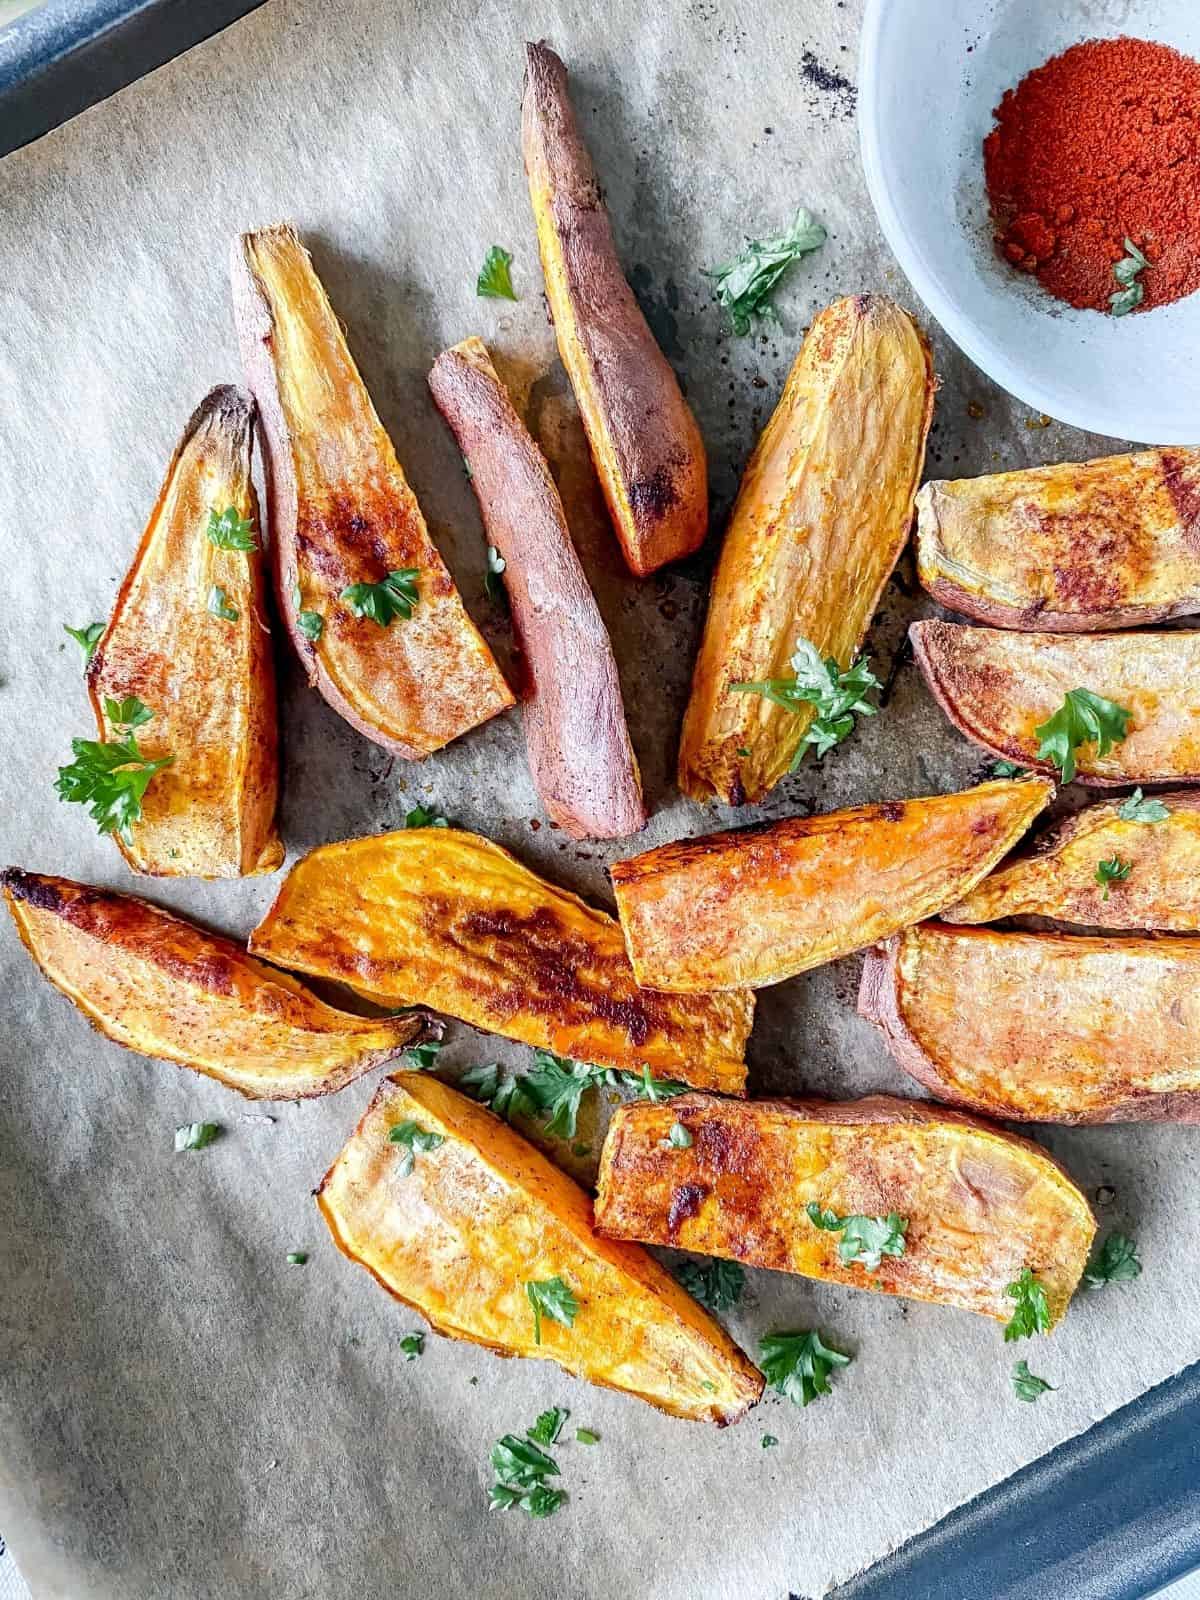 sweet potato wedges on a baking tray with a blue bowl of sweet paprika next to them.